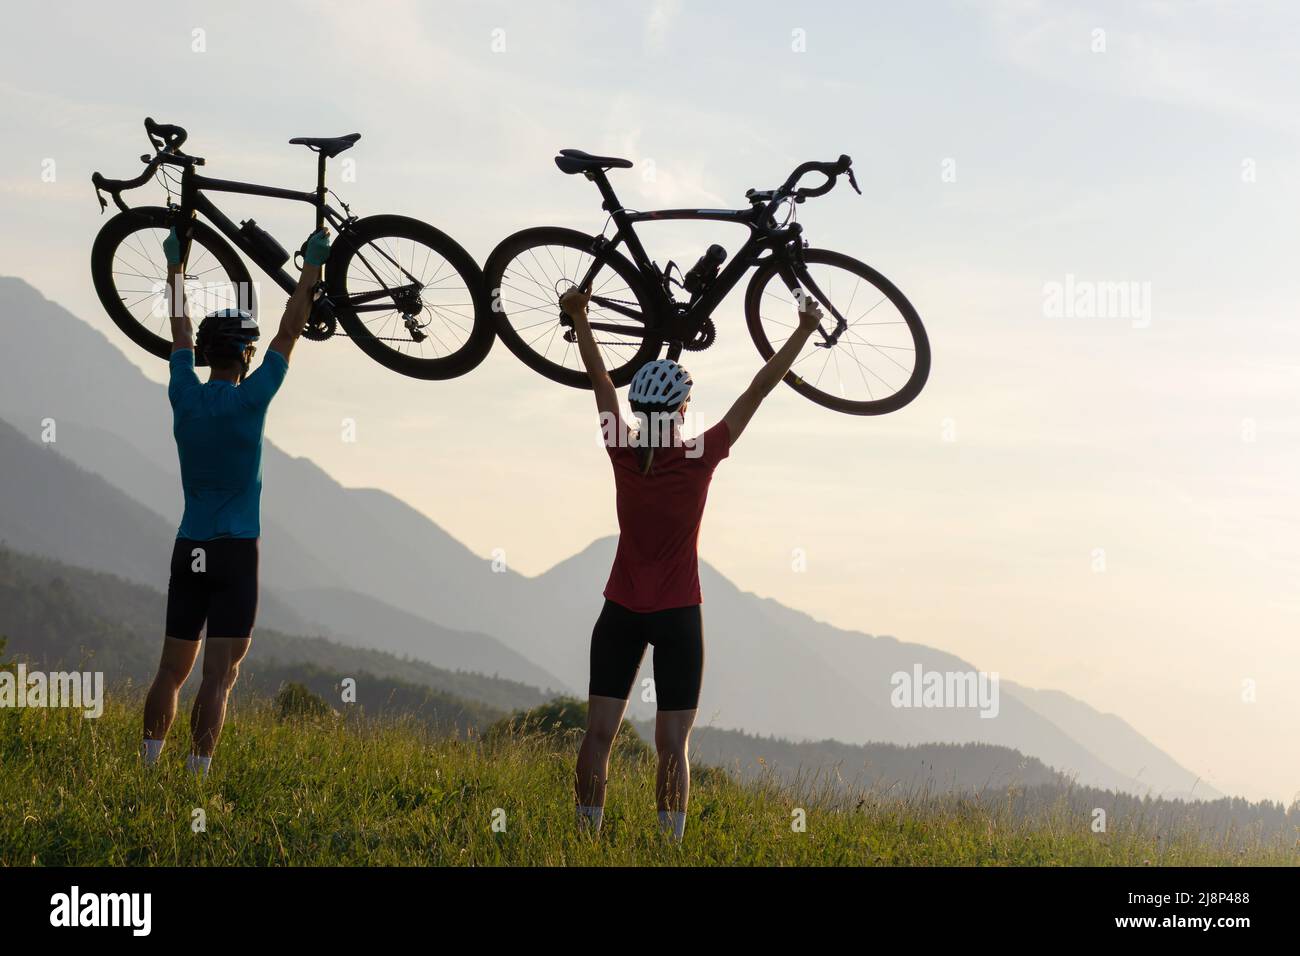 Two cyclers silhouettes holding road bicycles high above heads, in winner pose during sunset over the mountain landscape Stock Photo